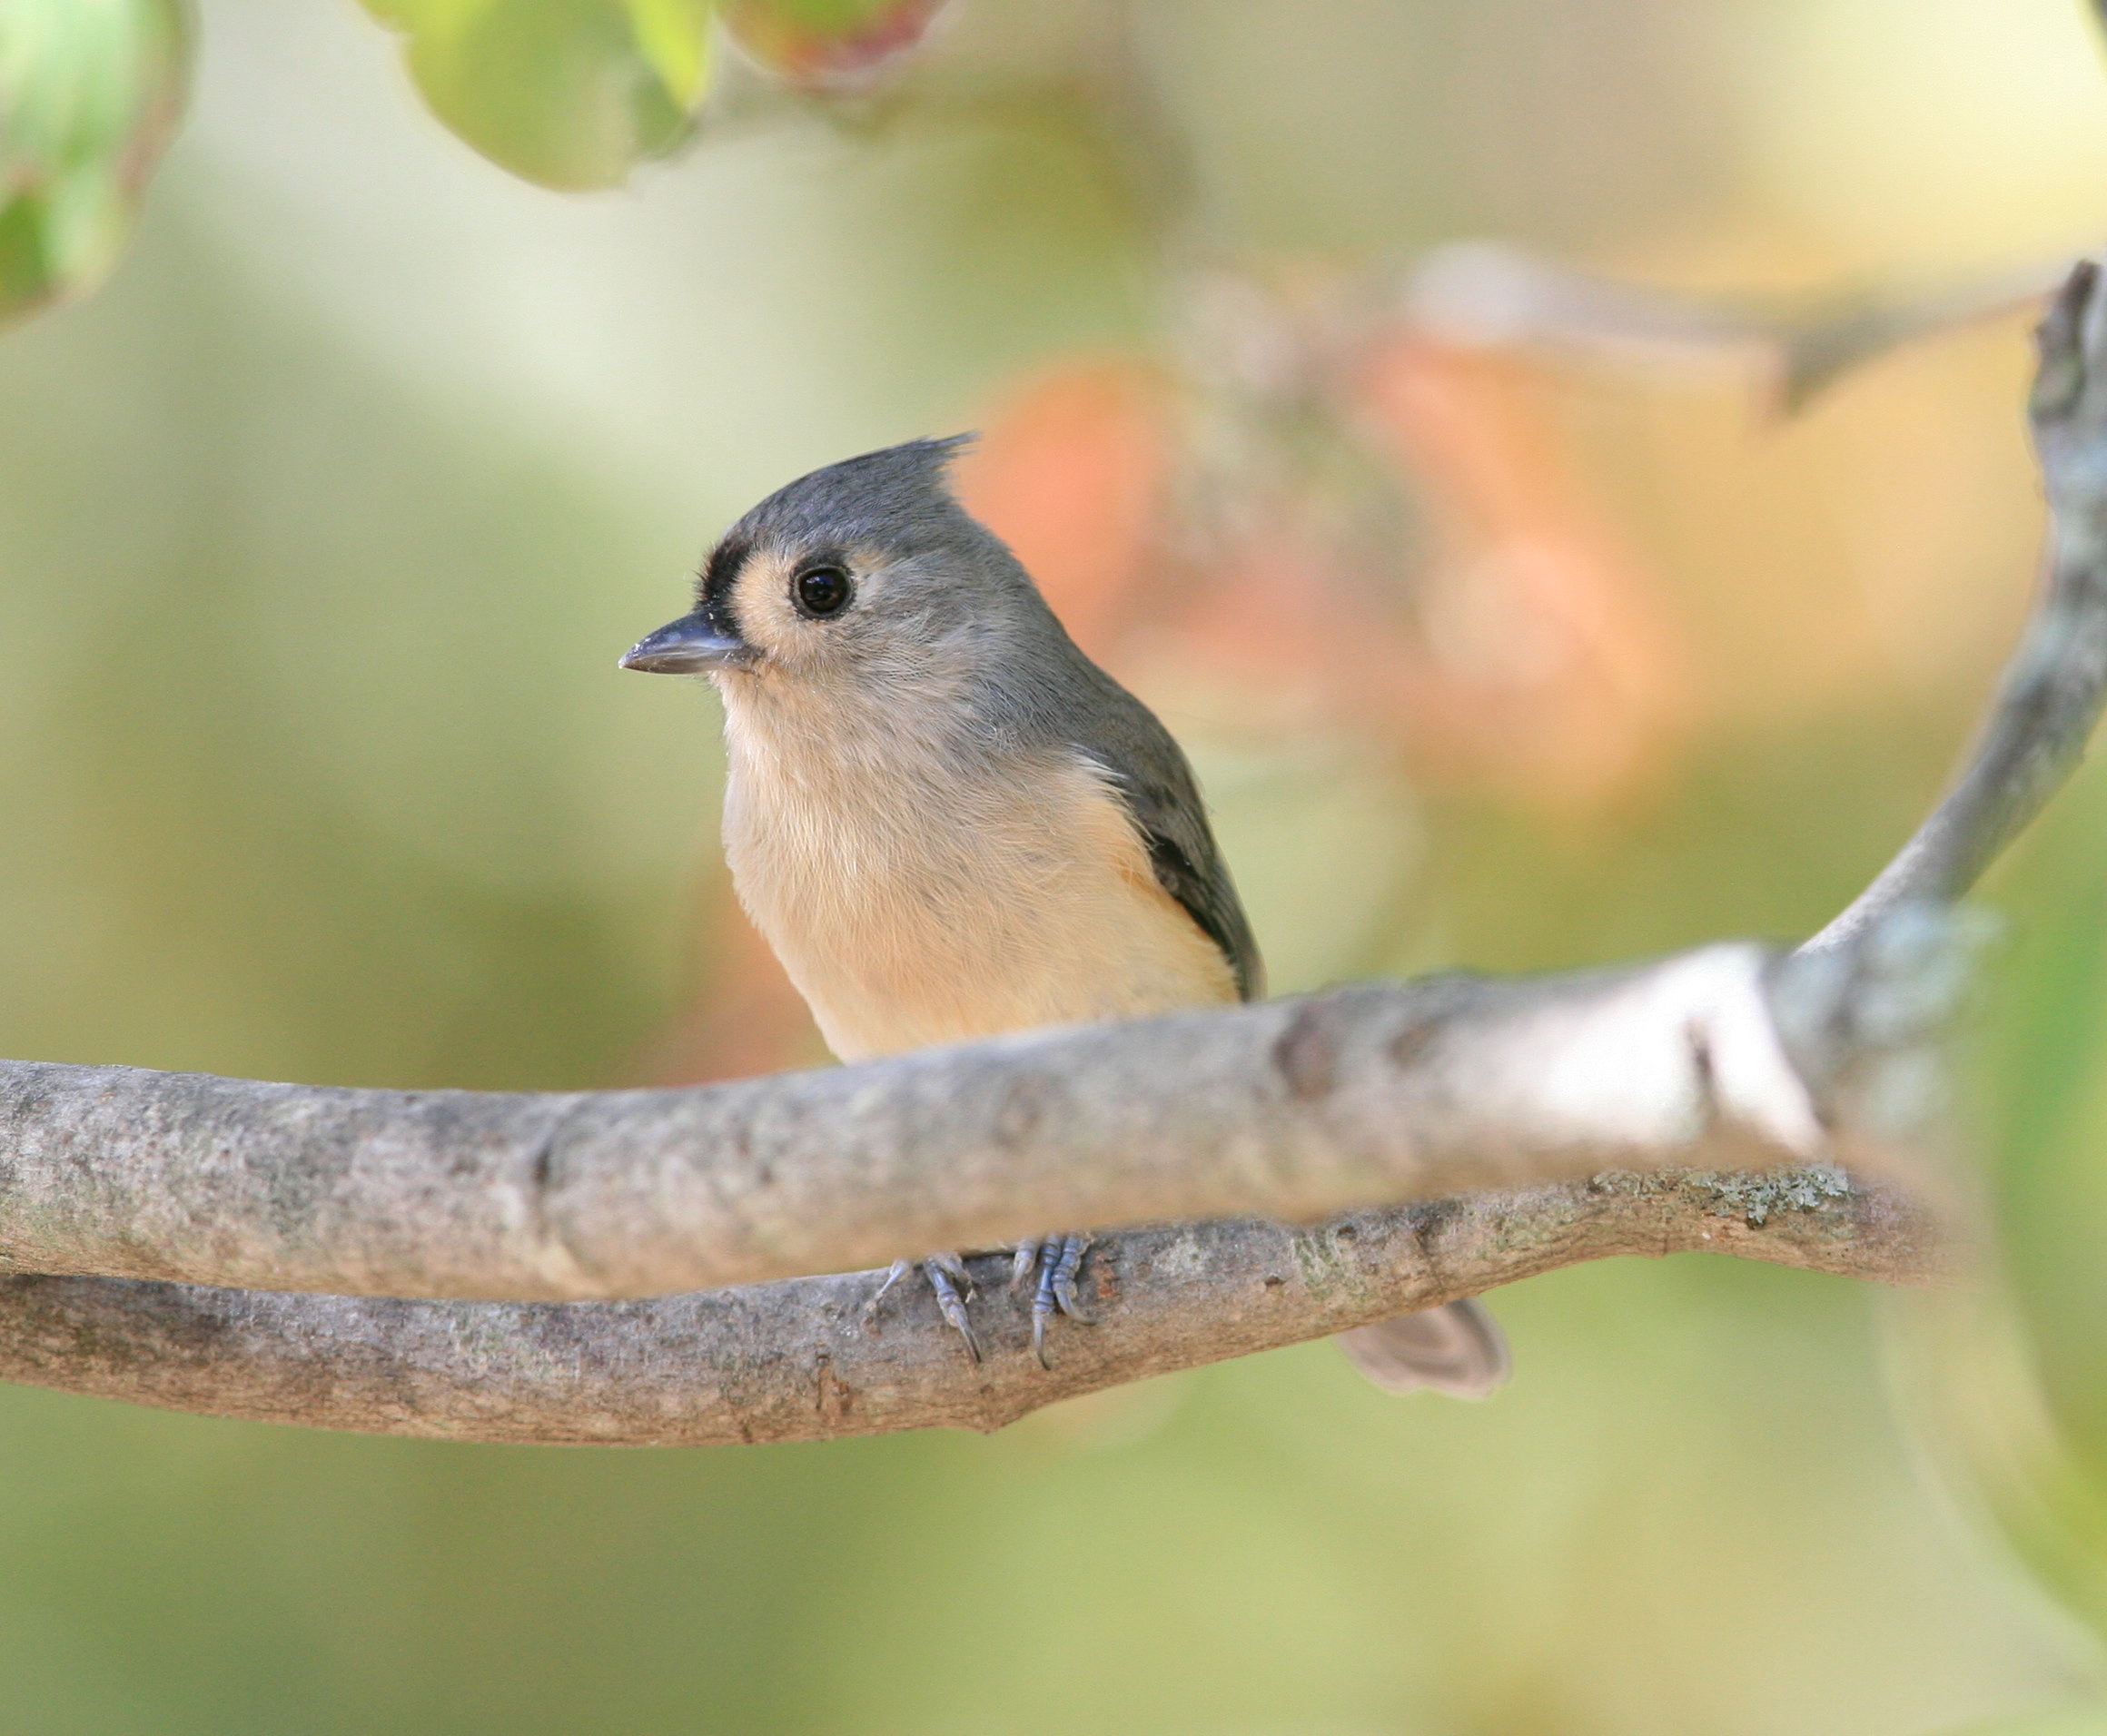 Tufted titmouse in a tree photo